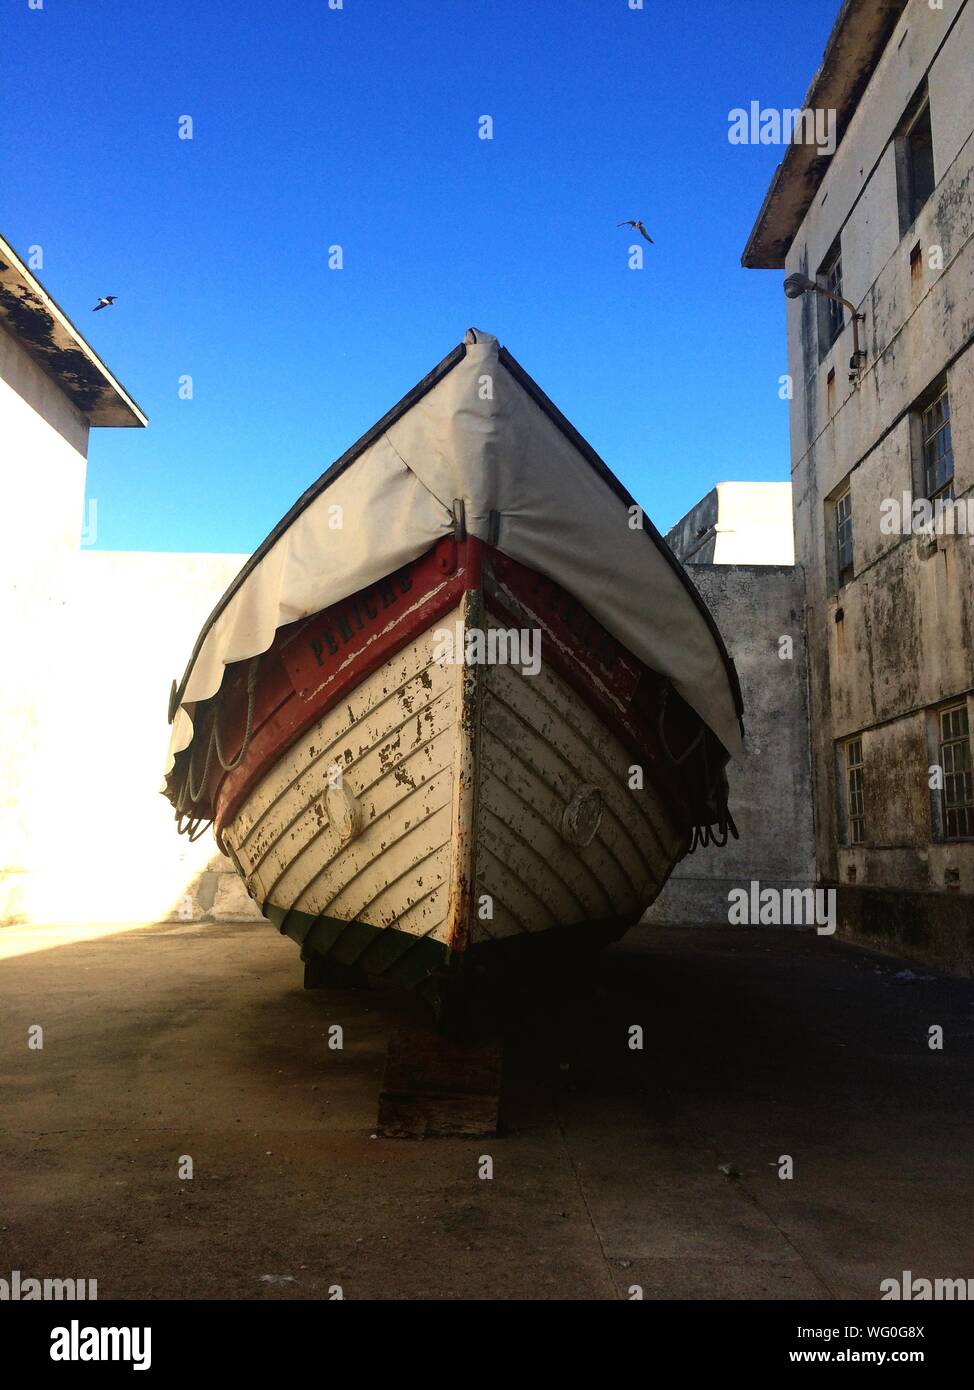 Boat By Building Against Clear Sky Stock Photo